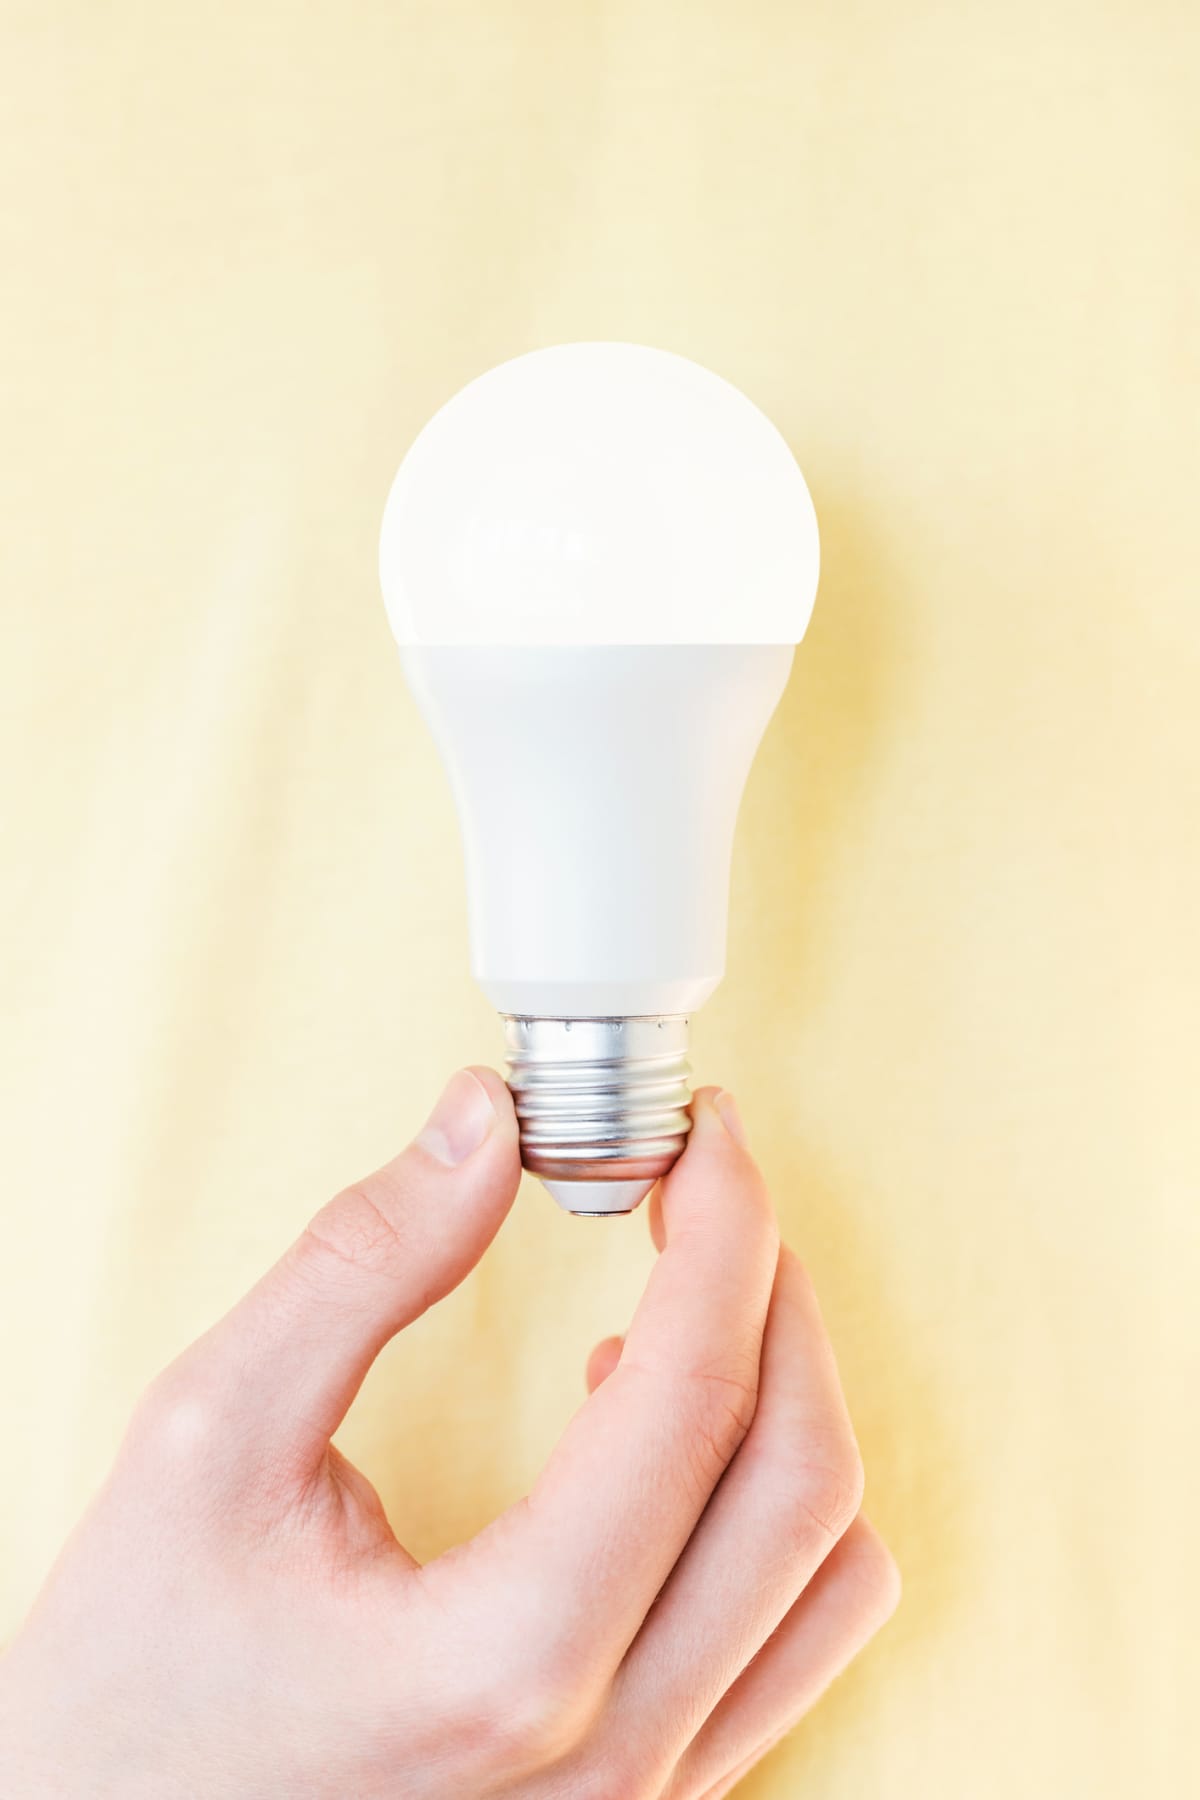 Hand holding shining LED light bulb against yellow background. Concept of responsible consumption of electricity or having an idea.